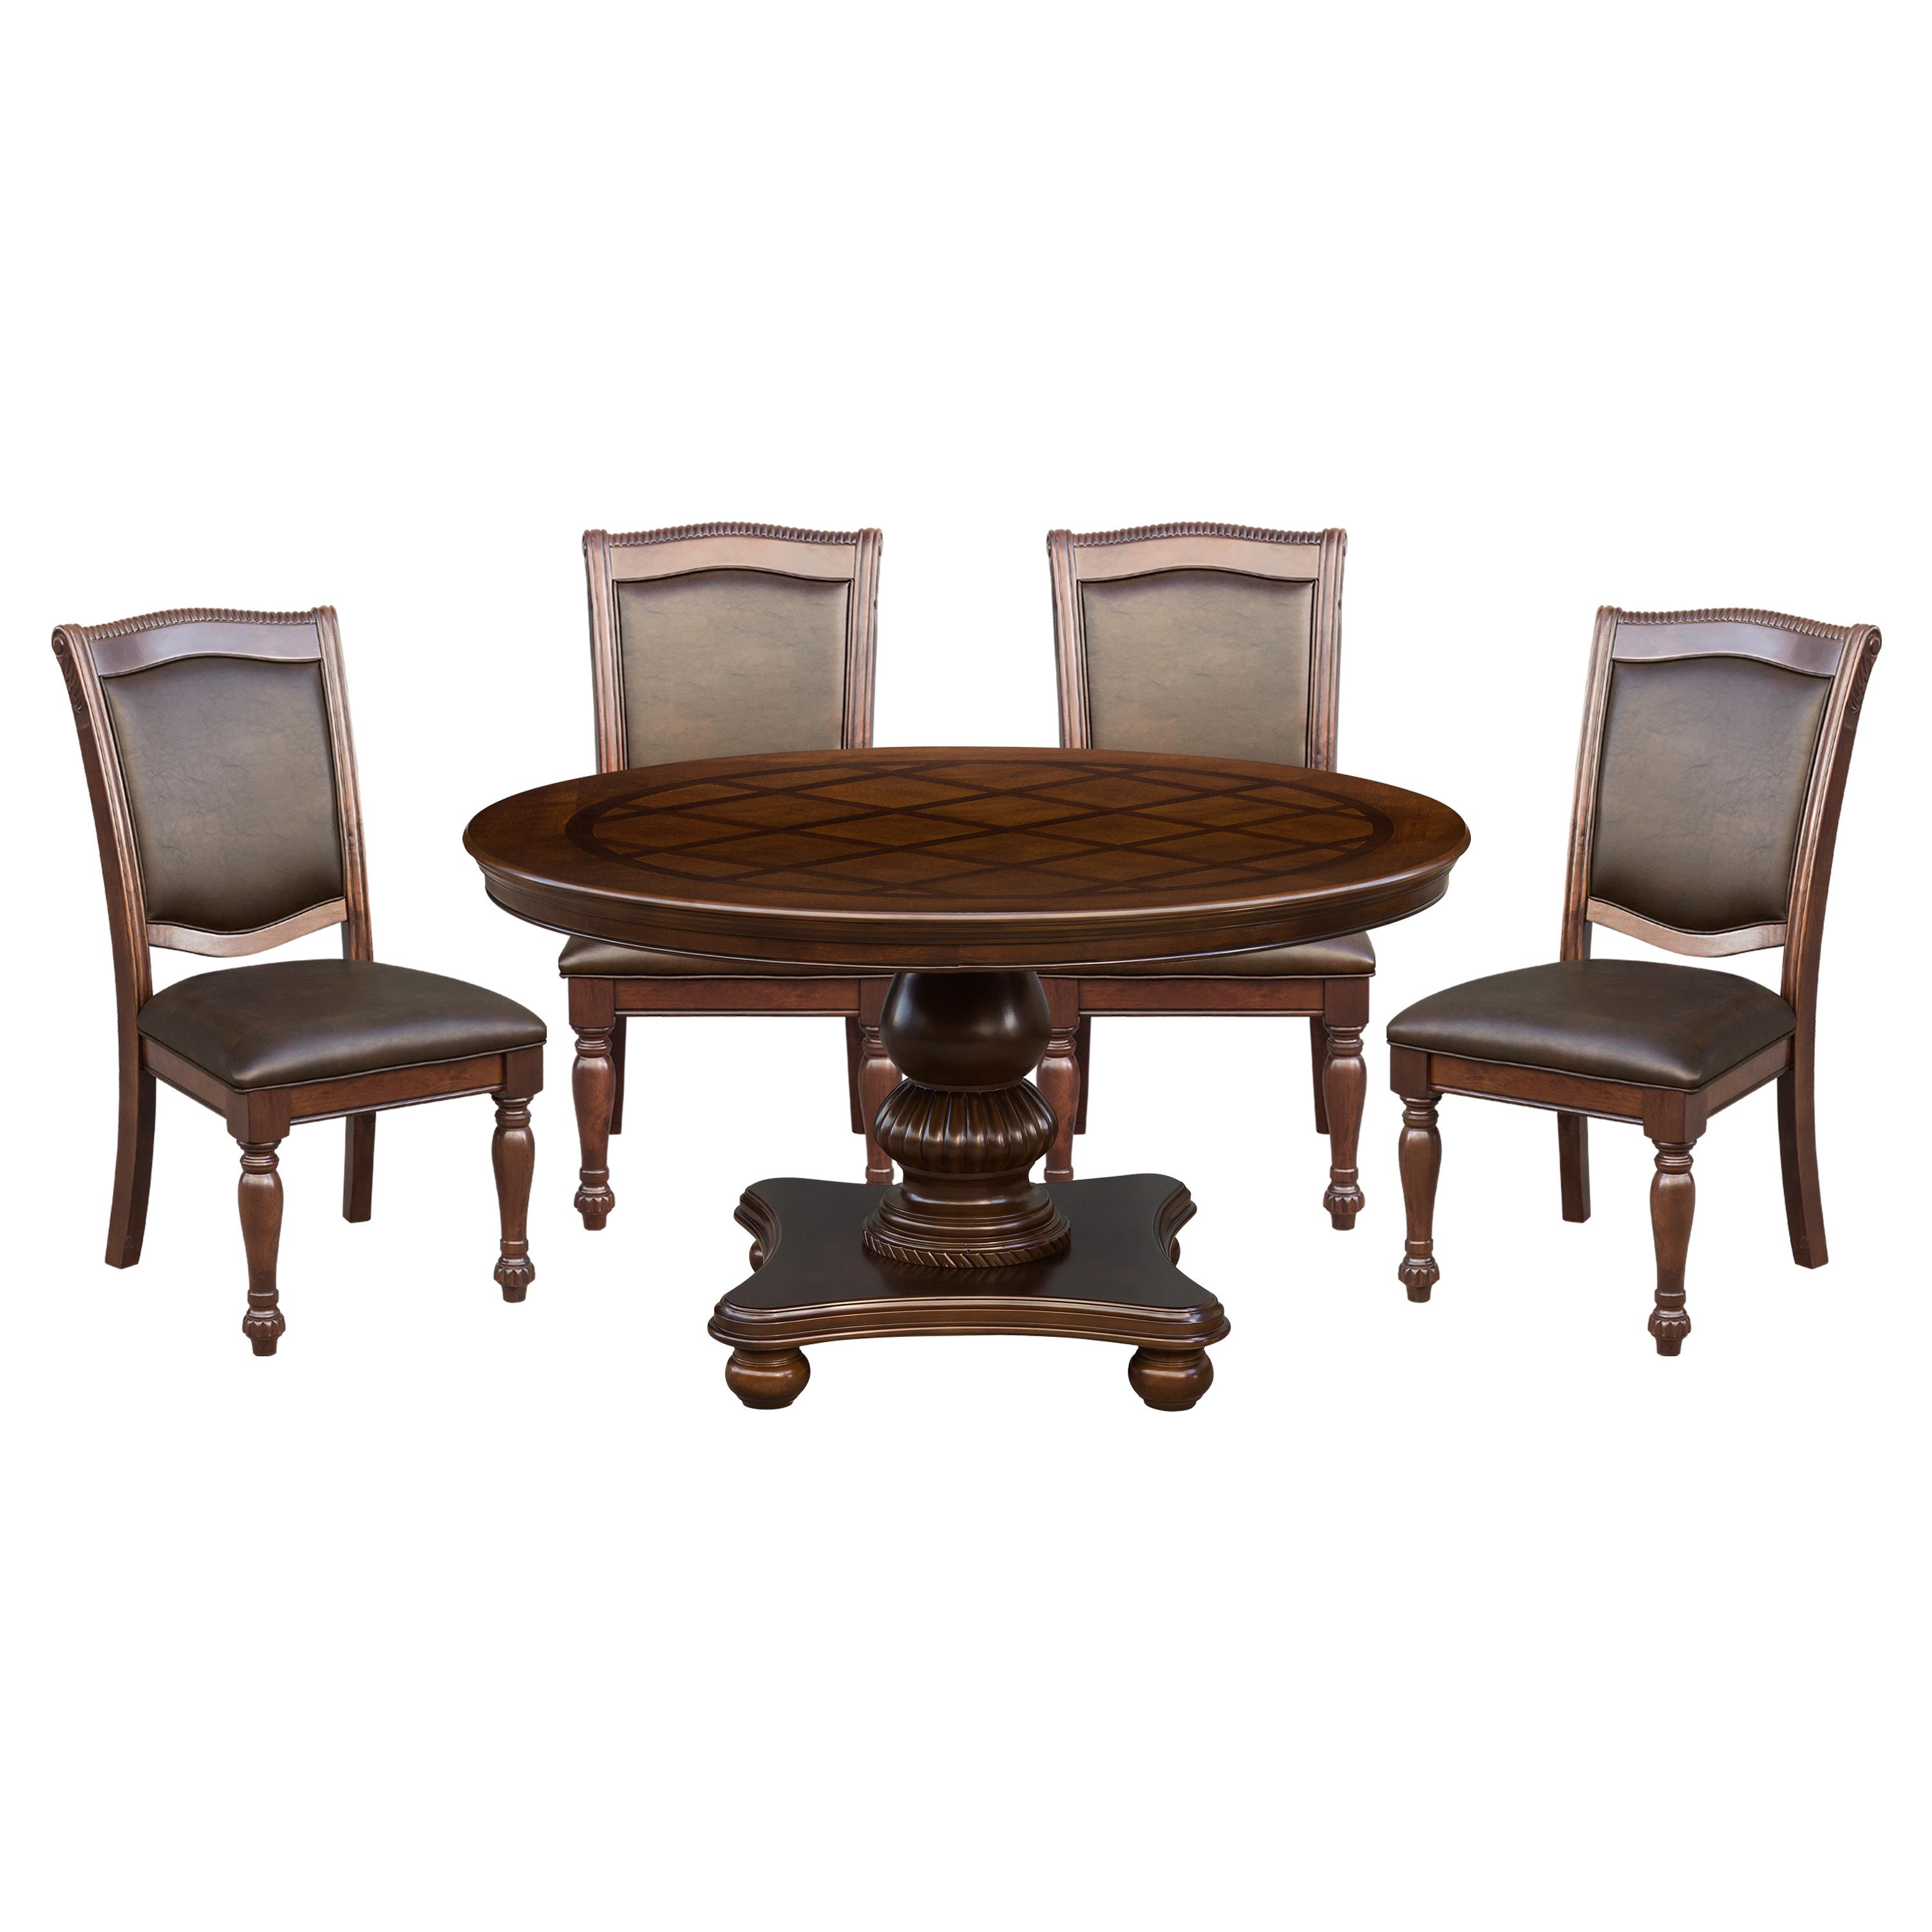 Traditional Dining Room Set 5473-54*5PC Lordsburg 5473-54*5PC in Cherry Faux Leather